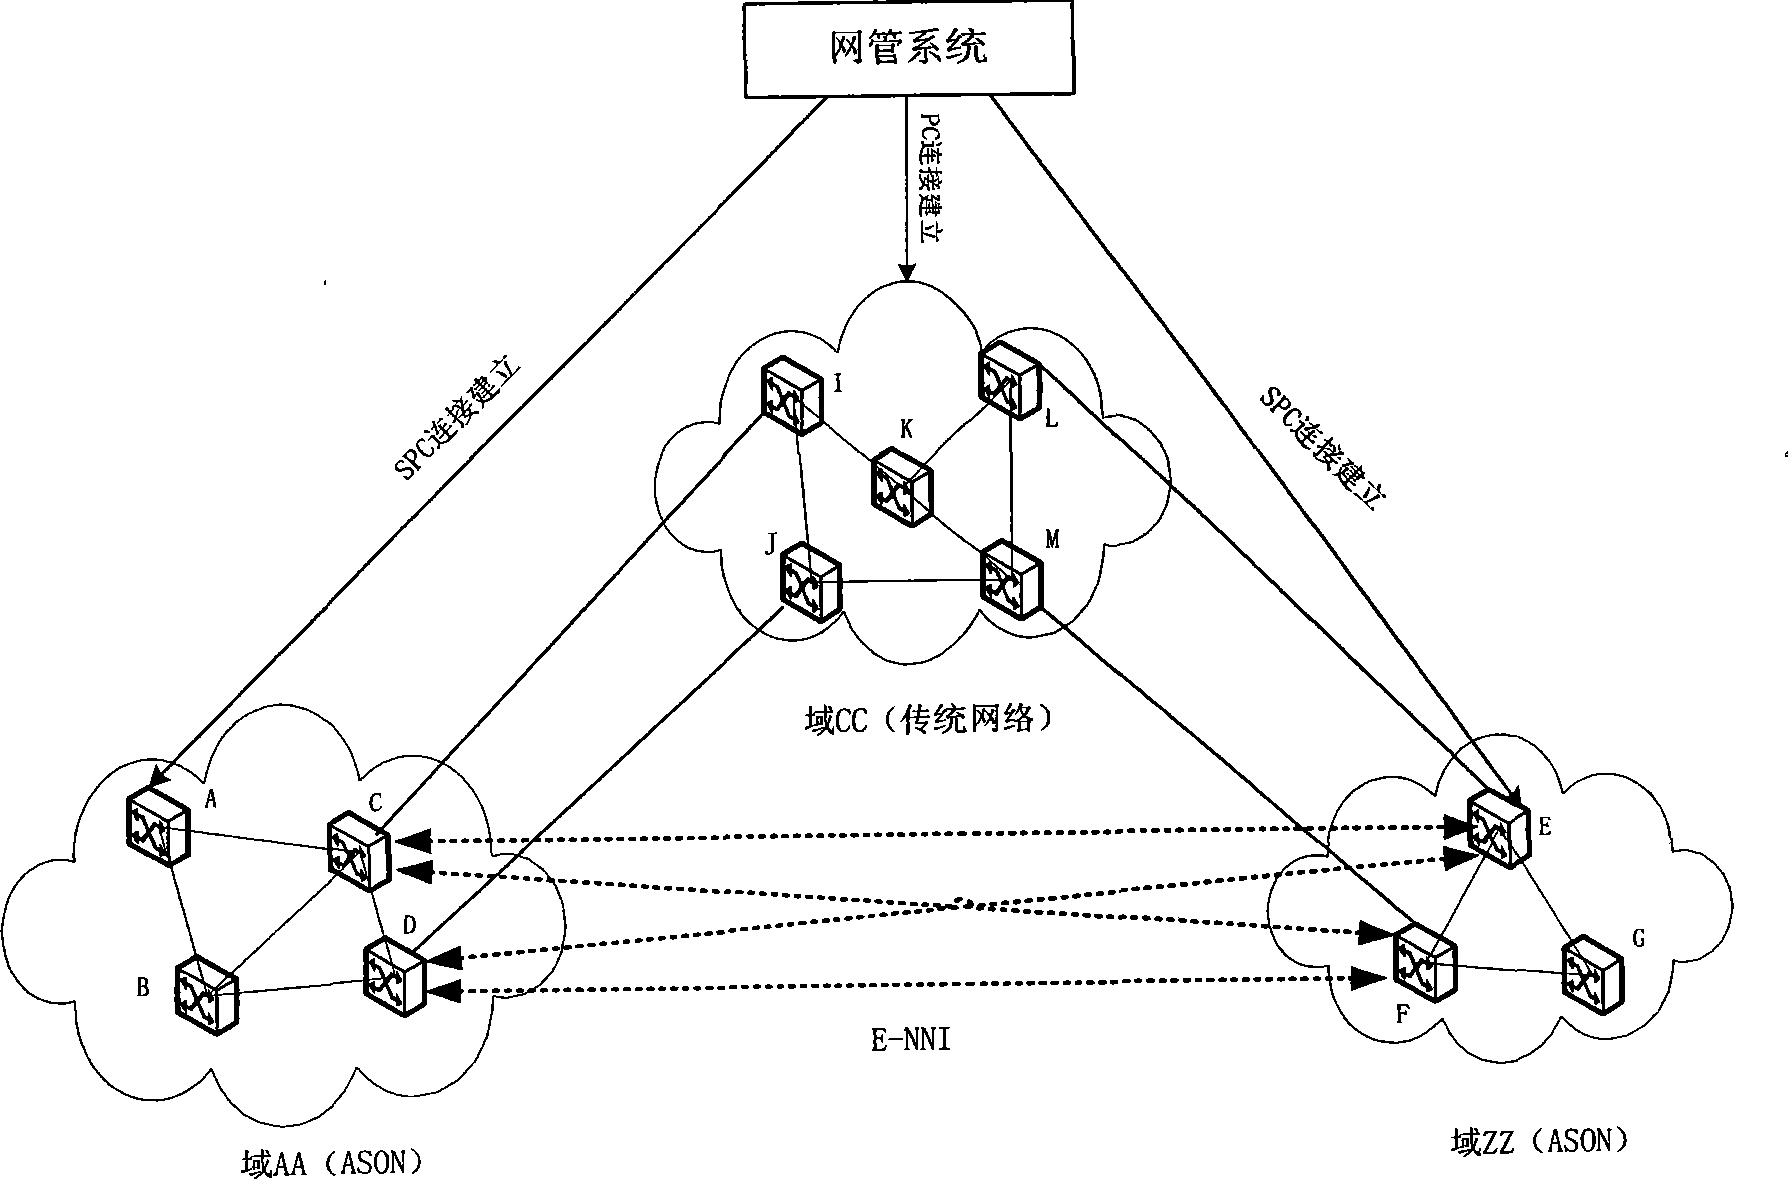 System and method for implementing terminal-to-terminal call connection between optical networks